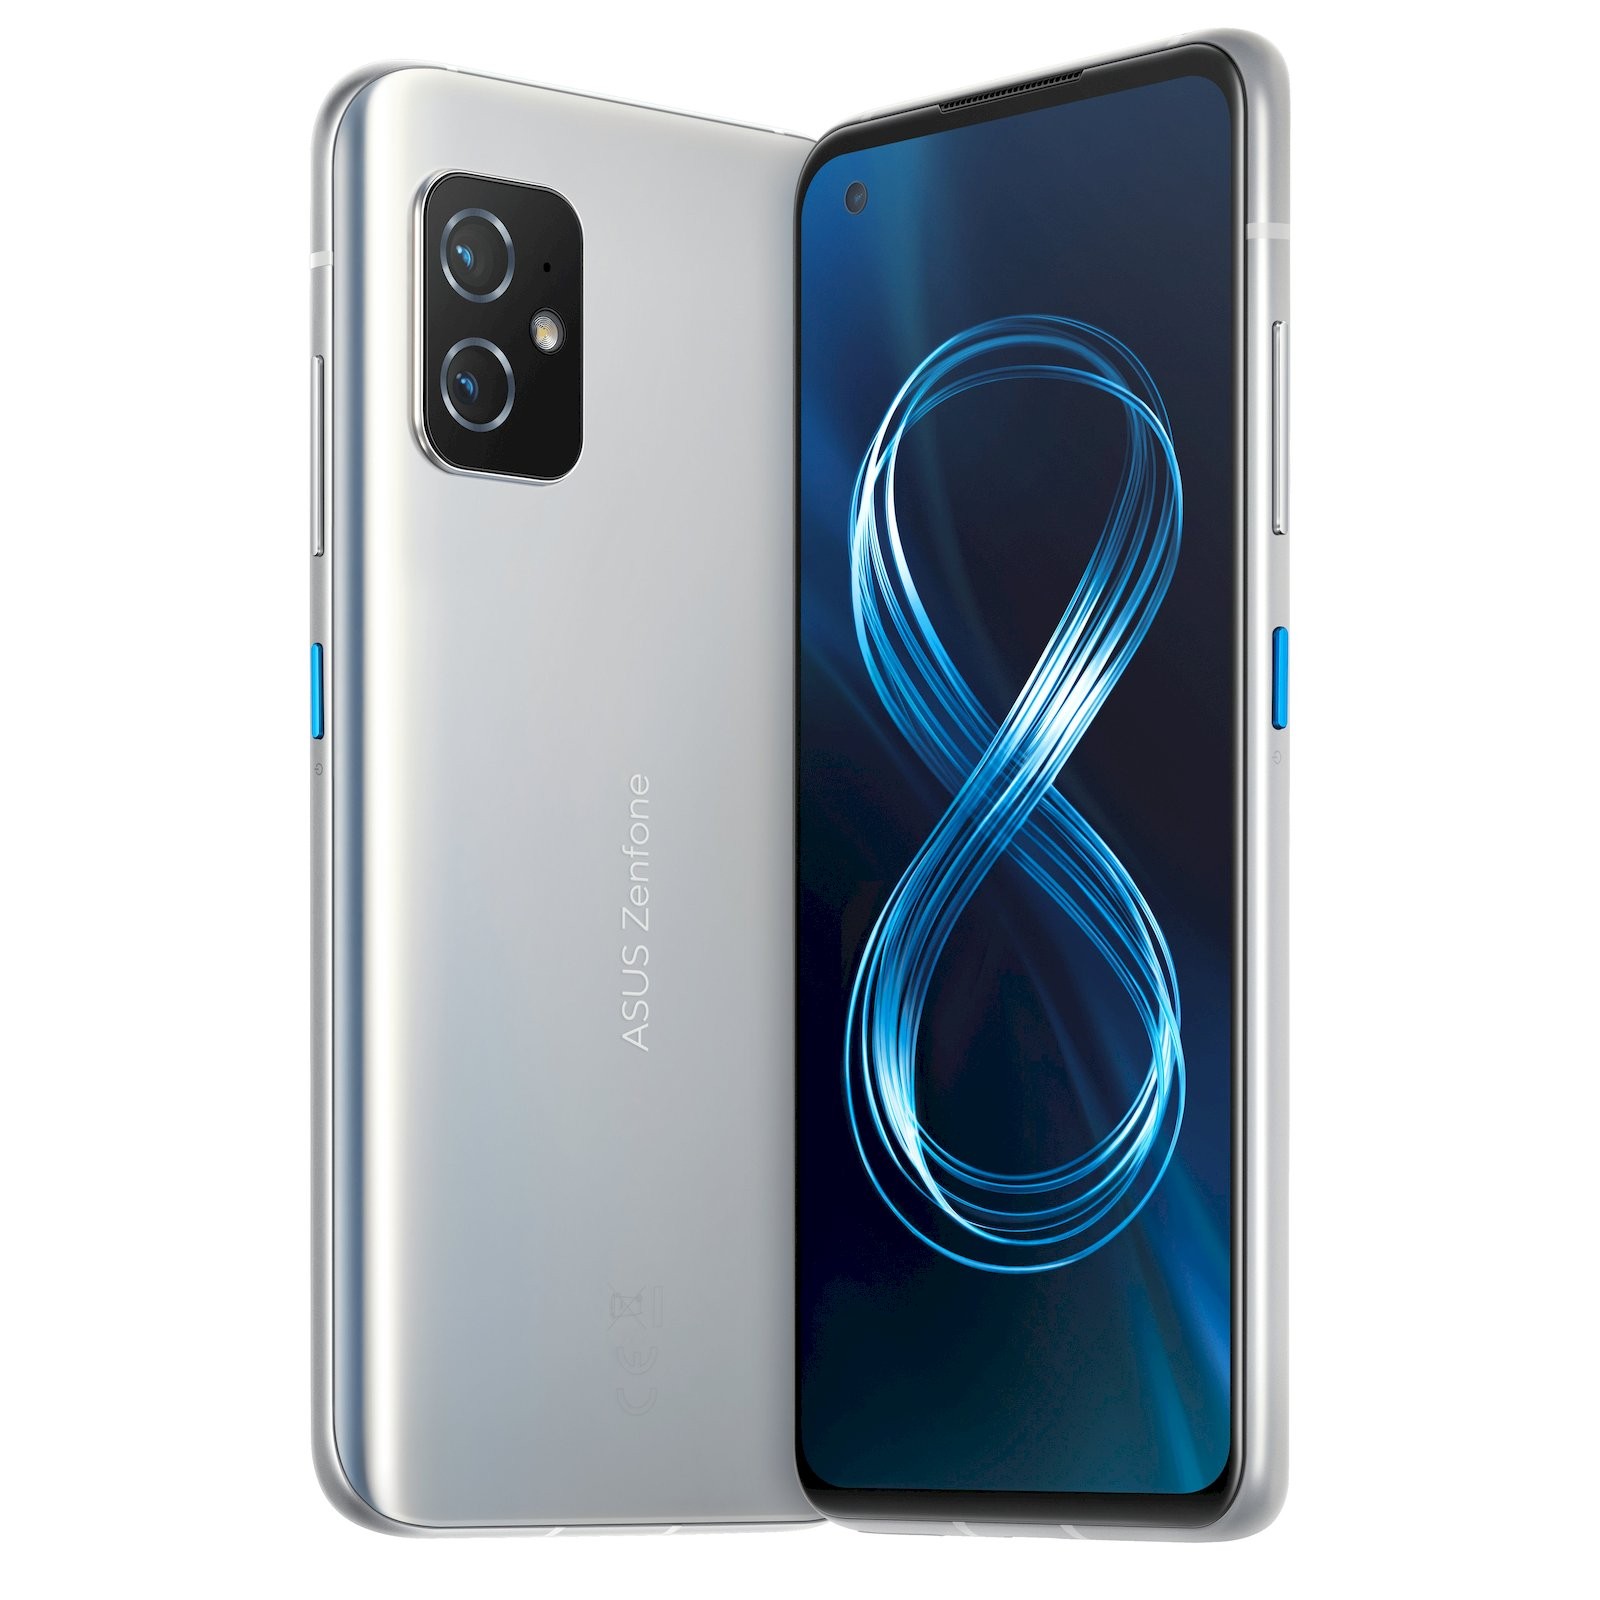 Asus Zenfone 8 specs and price - Specifications-Pro